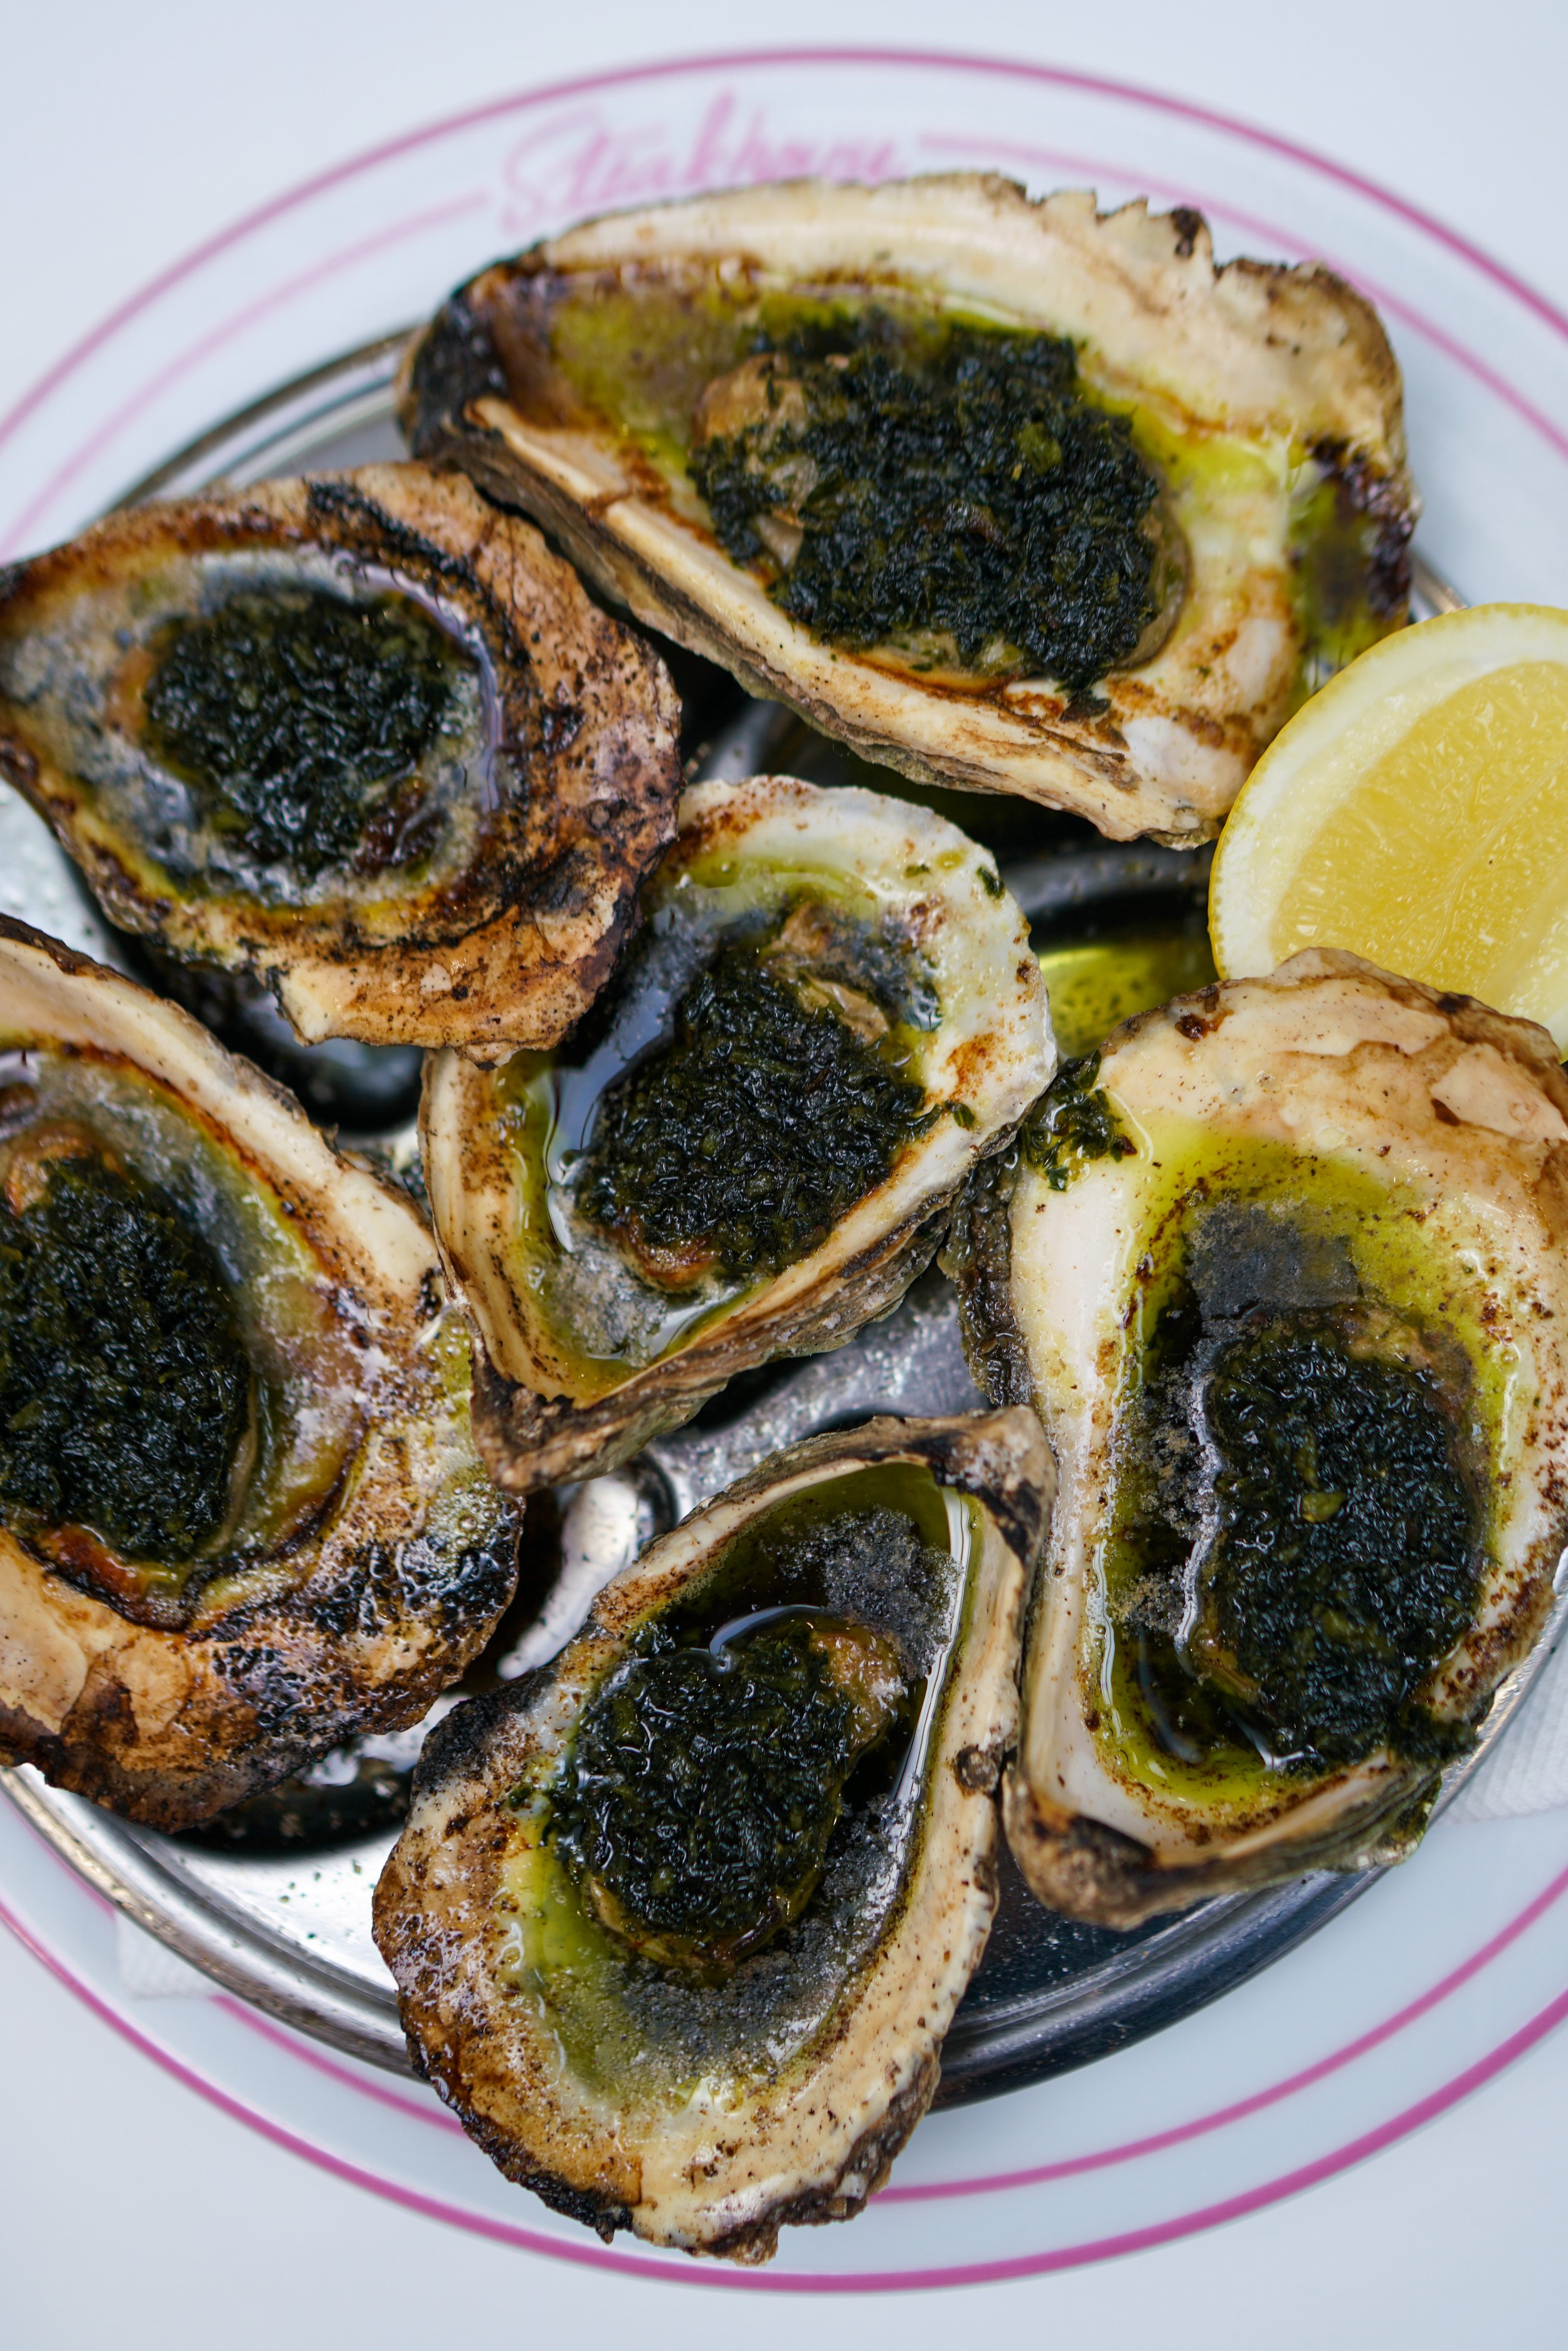 Giant Grilled Oysters 'Bourguignon'